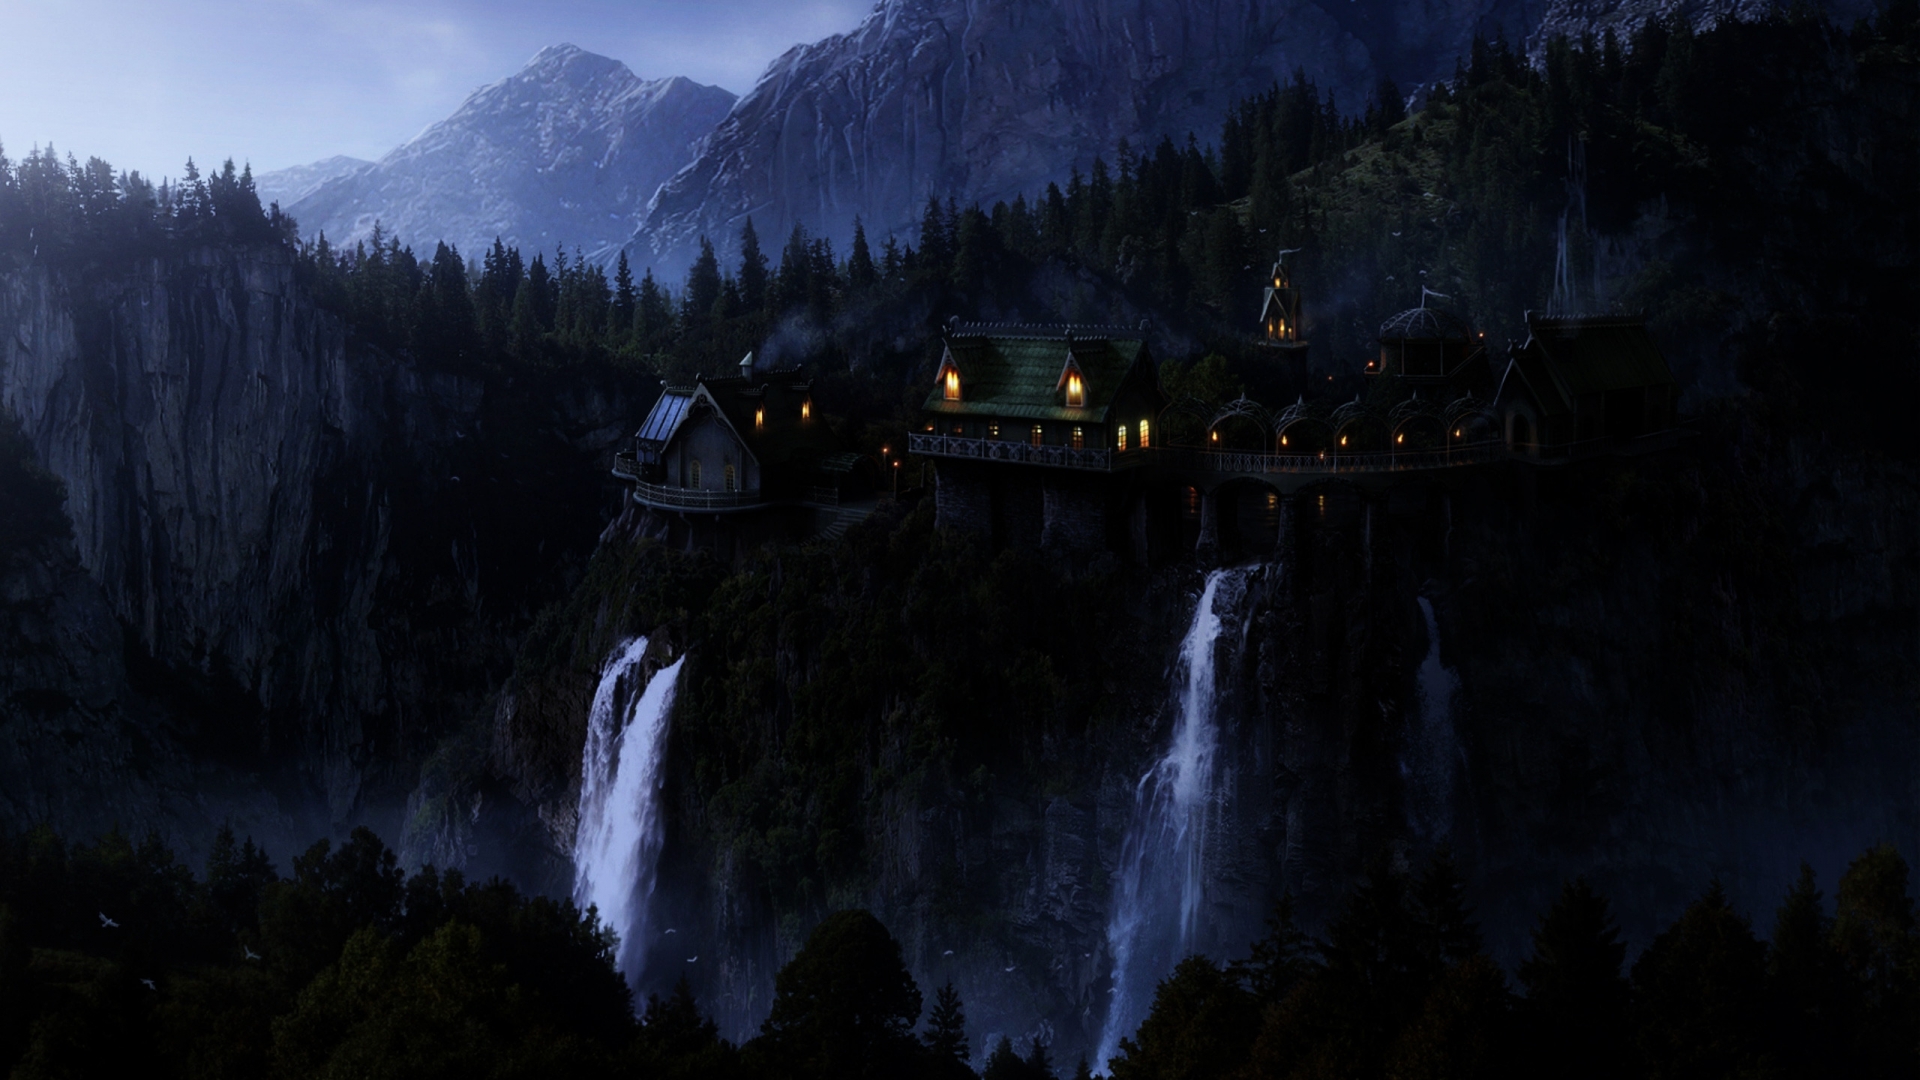 The Lord of the Rings Rivendell for 1920 x 1080 HDTV 1080p resolution